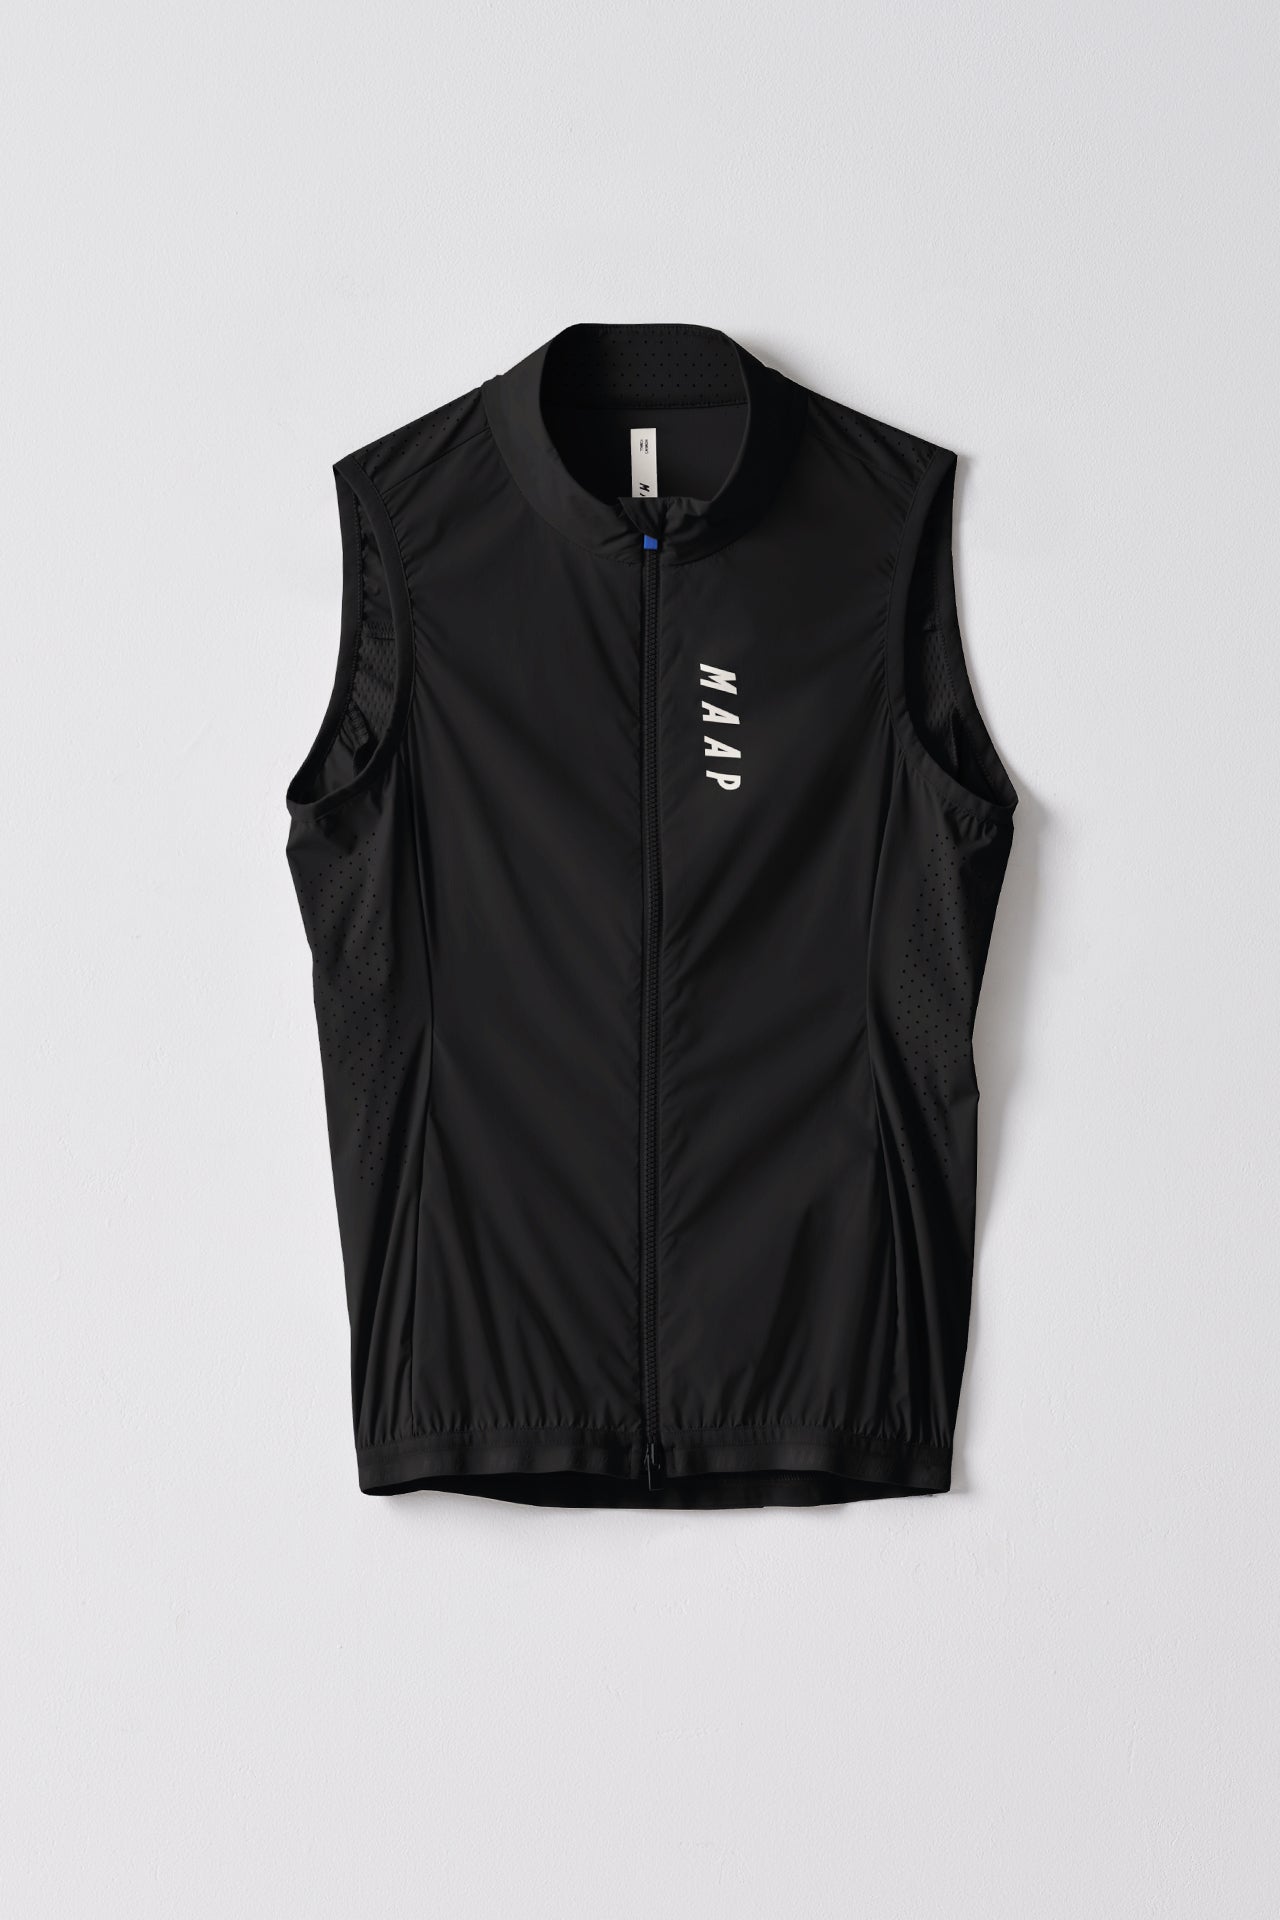 A MAAP Womens Draft Team Vest in Black with a white background